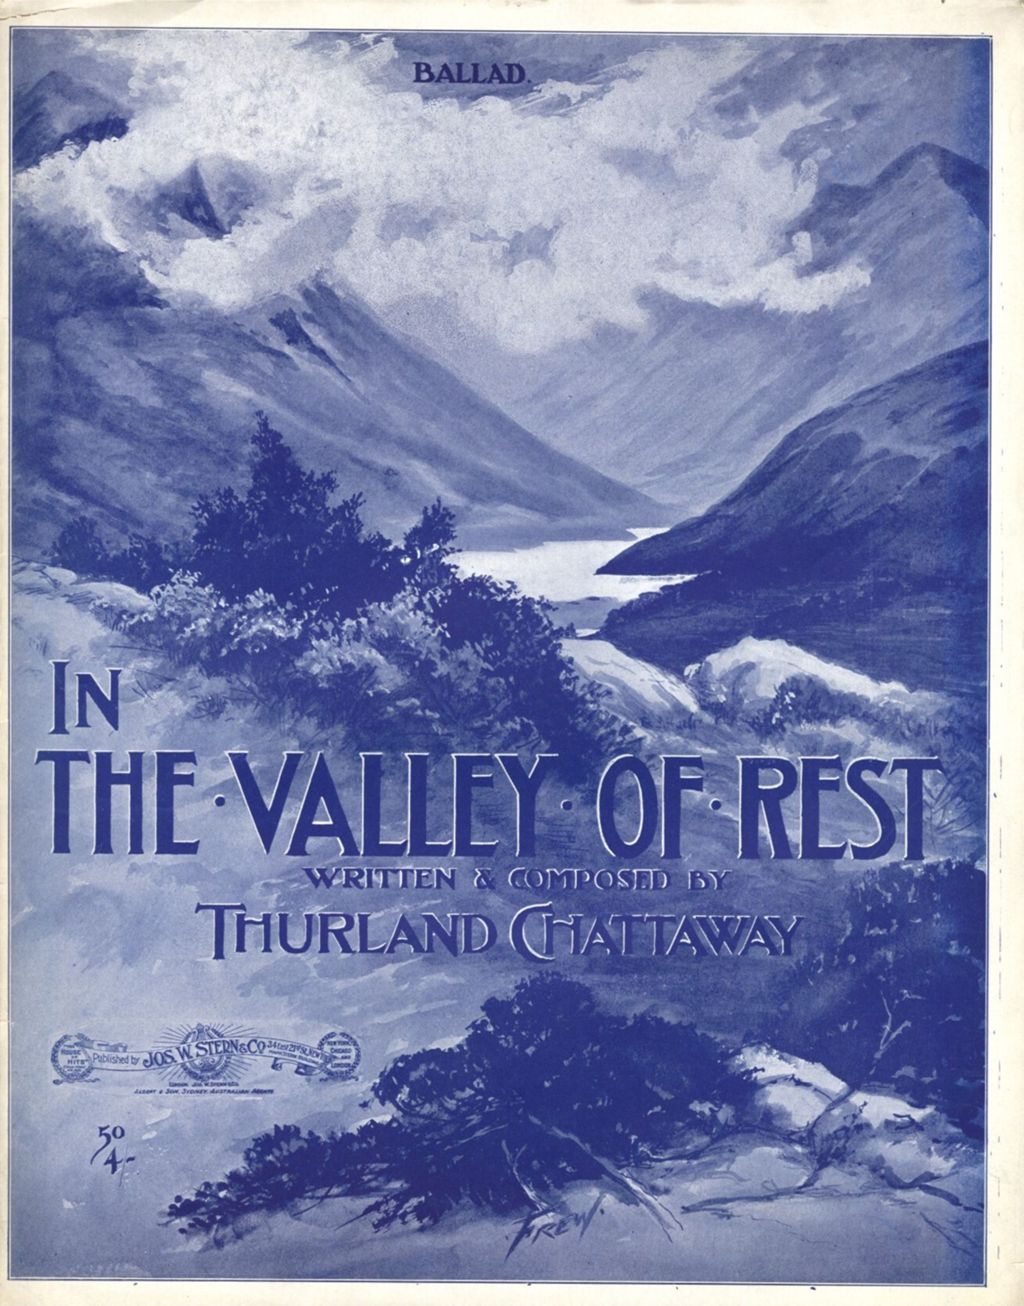 In The Valley of Rest